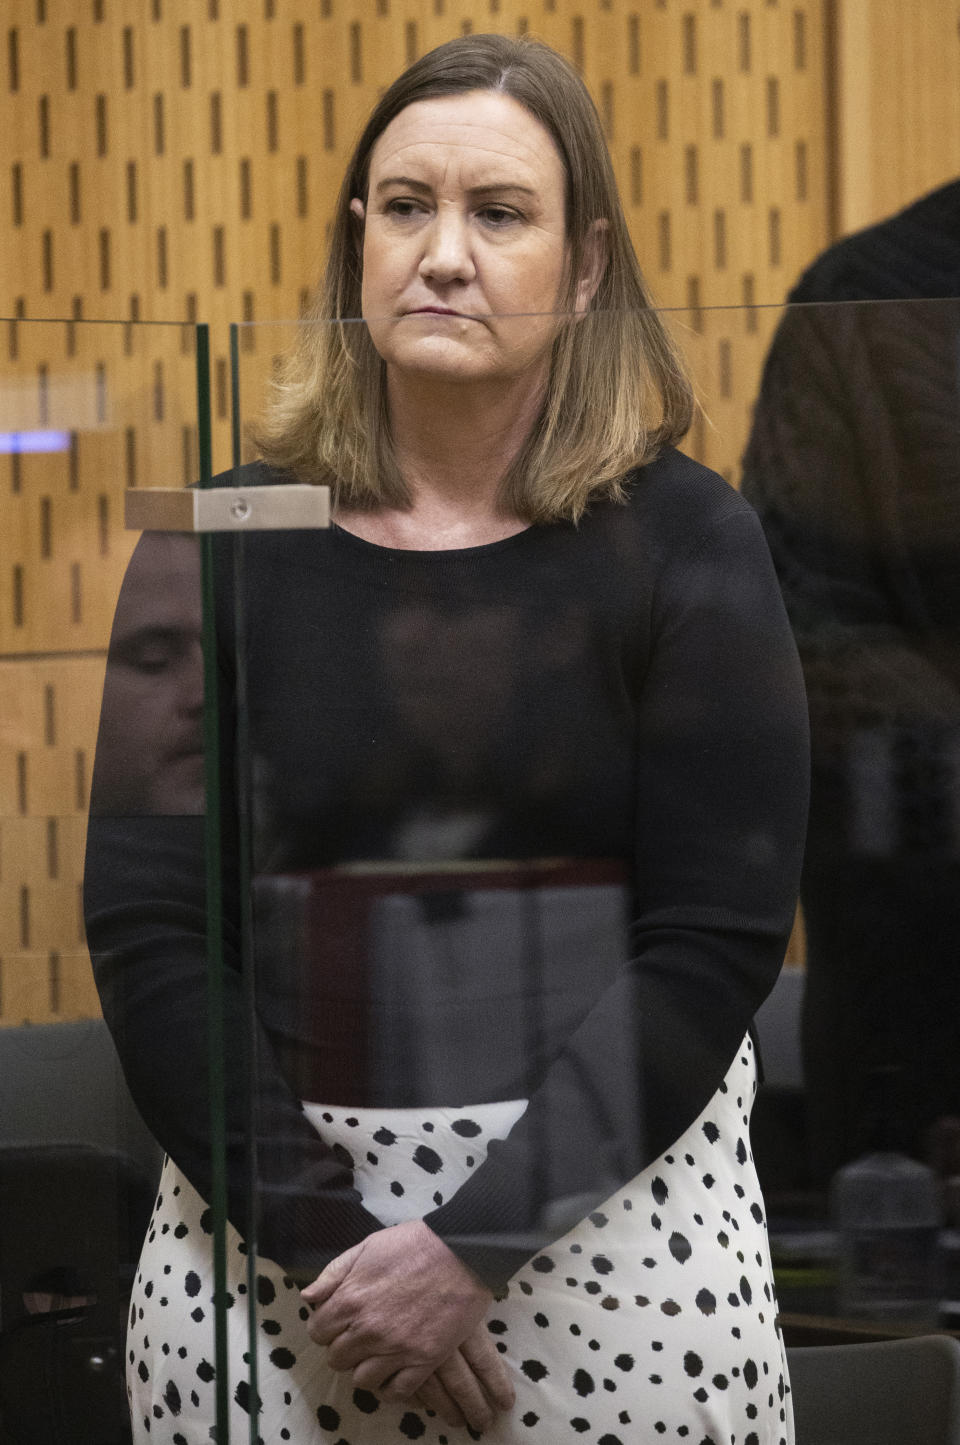 Lauren Dickason stands in the dock at the Christchurch High Court, in Christchurch, New Zealand, on July, 17, 2023. A New Zealand jury on Wednesday, Aug. 16, found Dickason, a mother guilty of murdering her three young daughters in a case that shocked the nation. (George Heard/New Zealand Herald via AP)